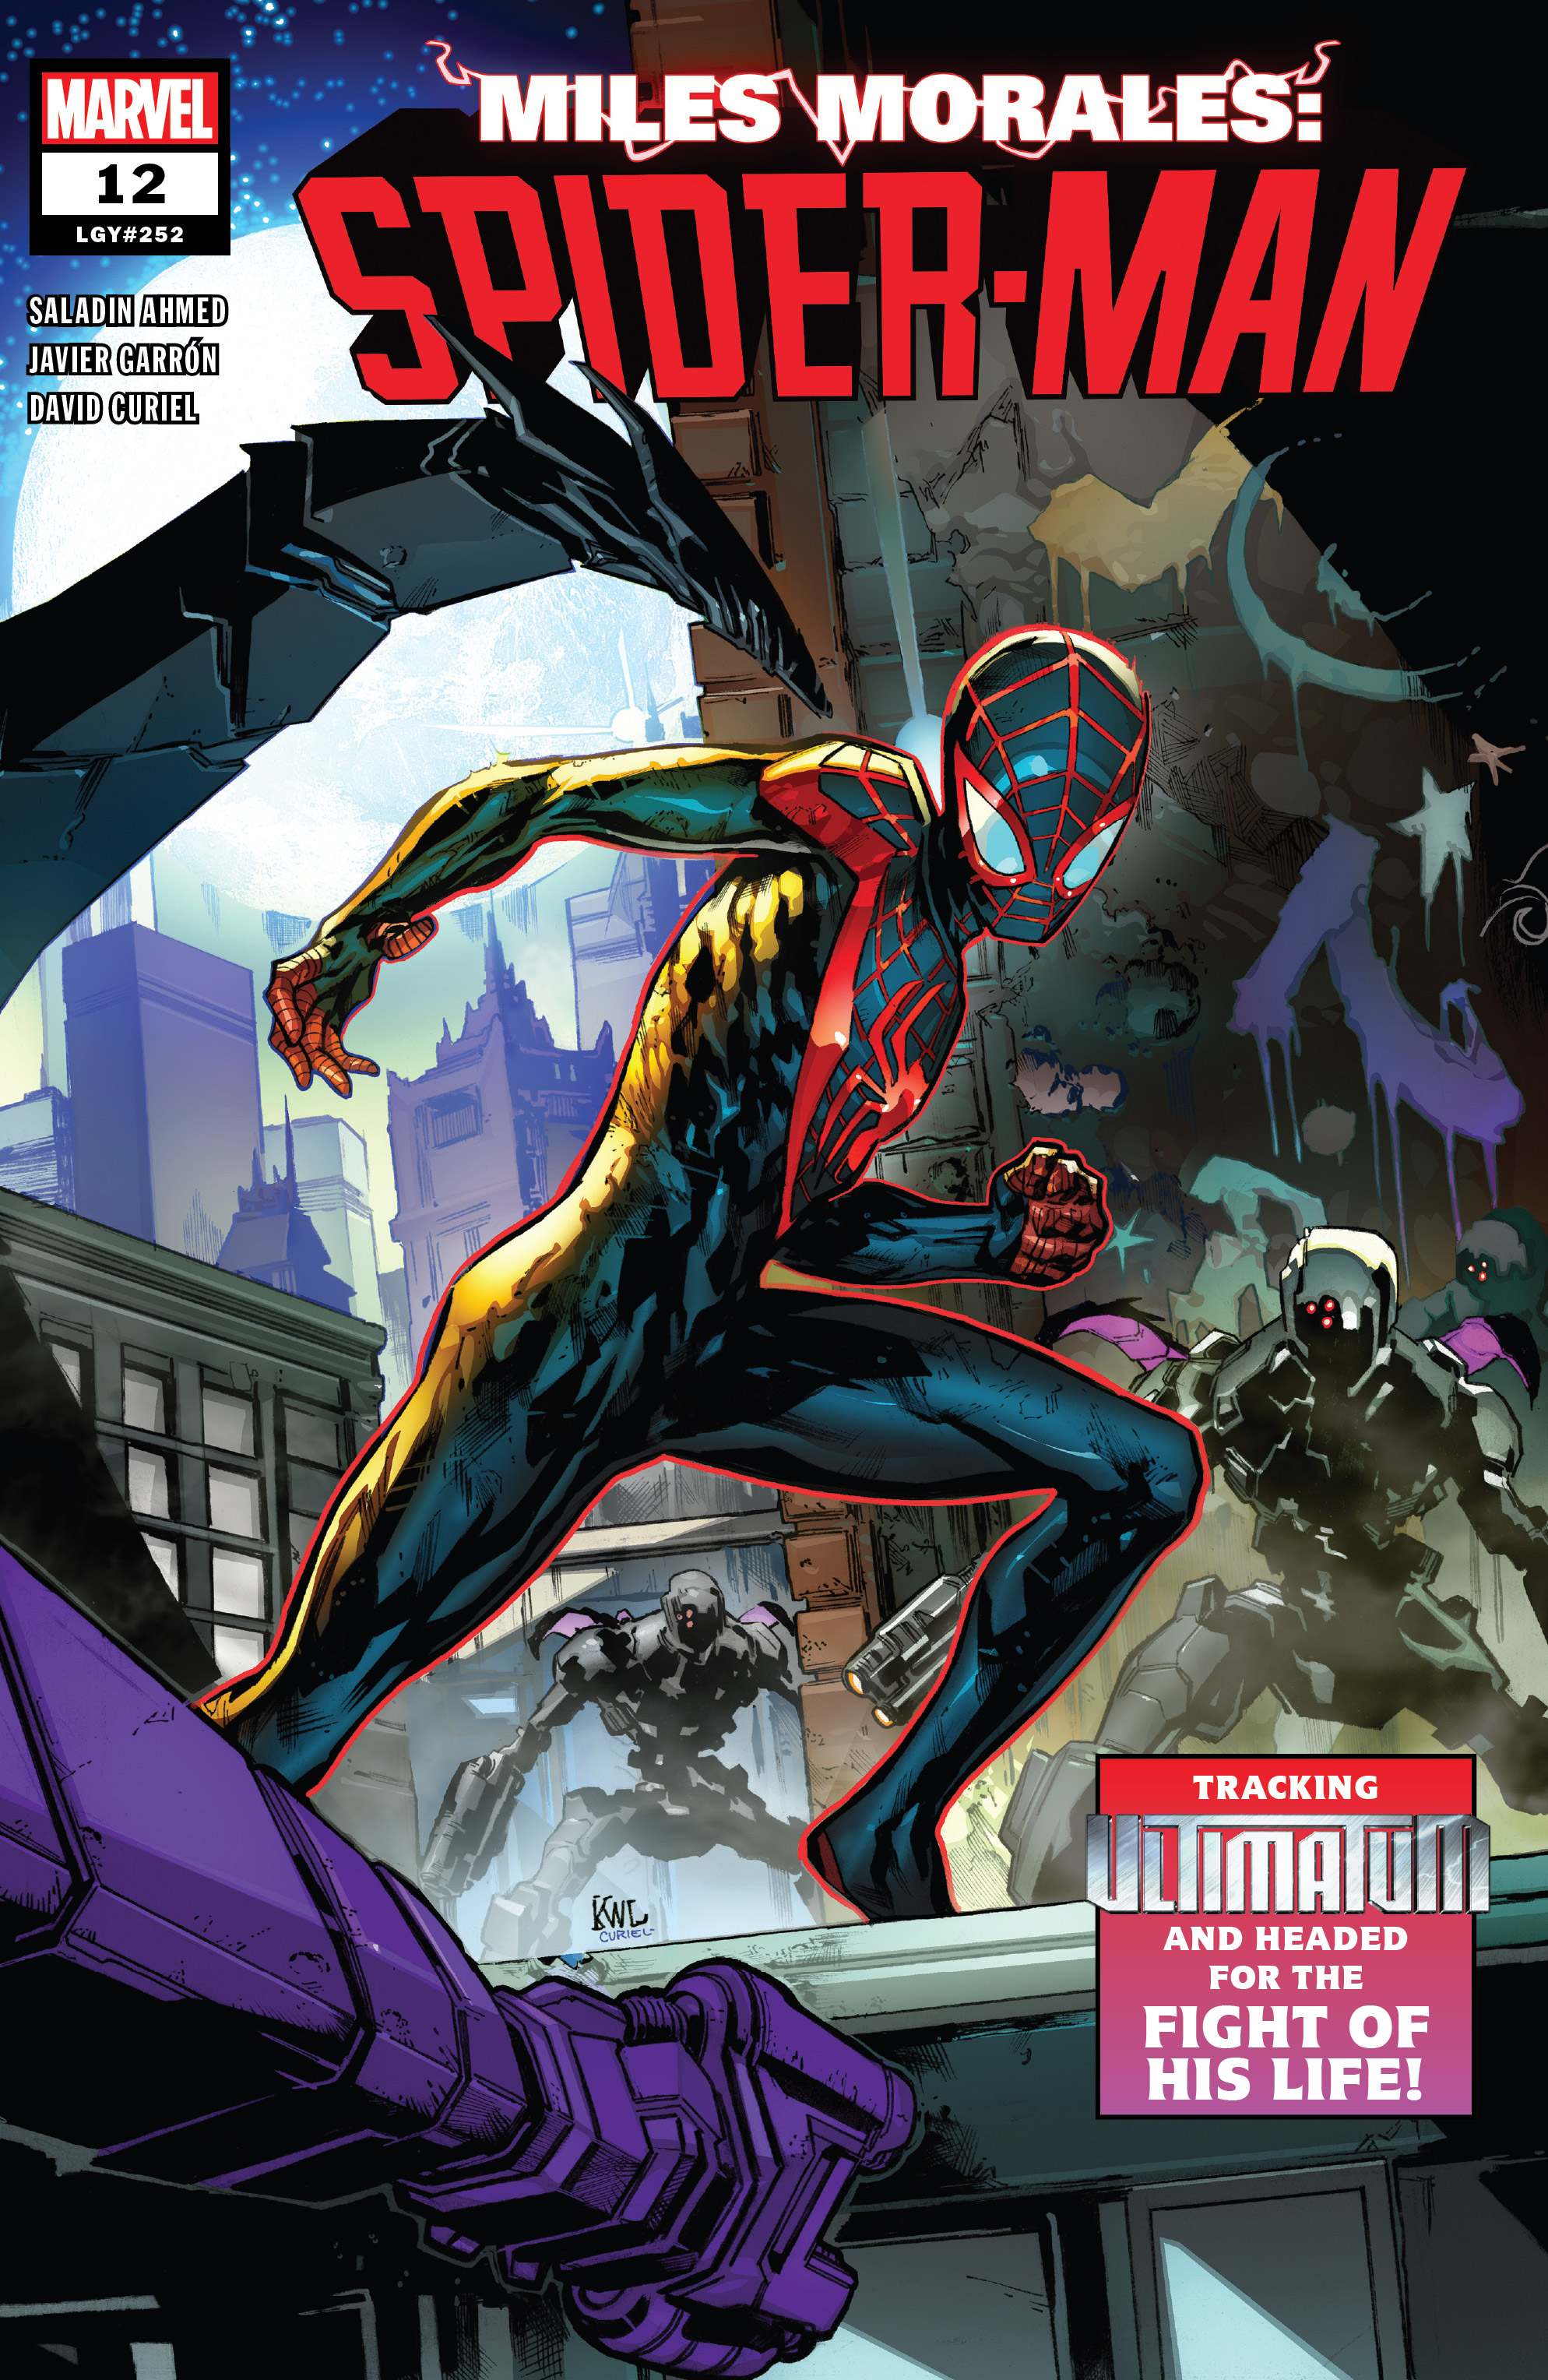 Read online Miles Morales: Spider-Man comic -  Issue #12 - 1